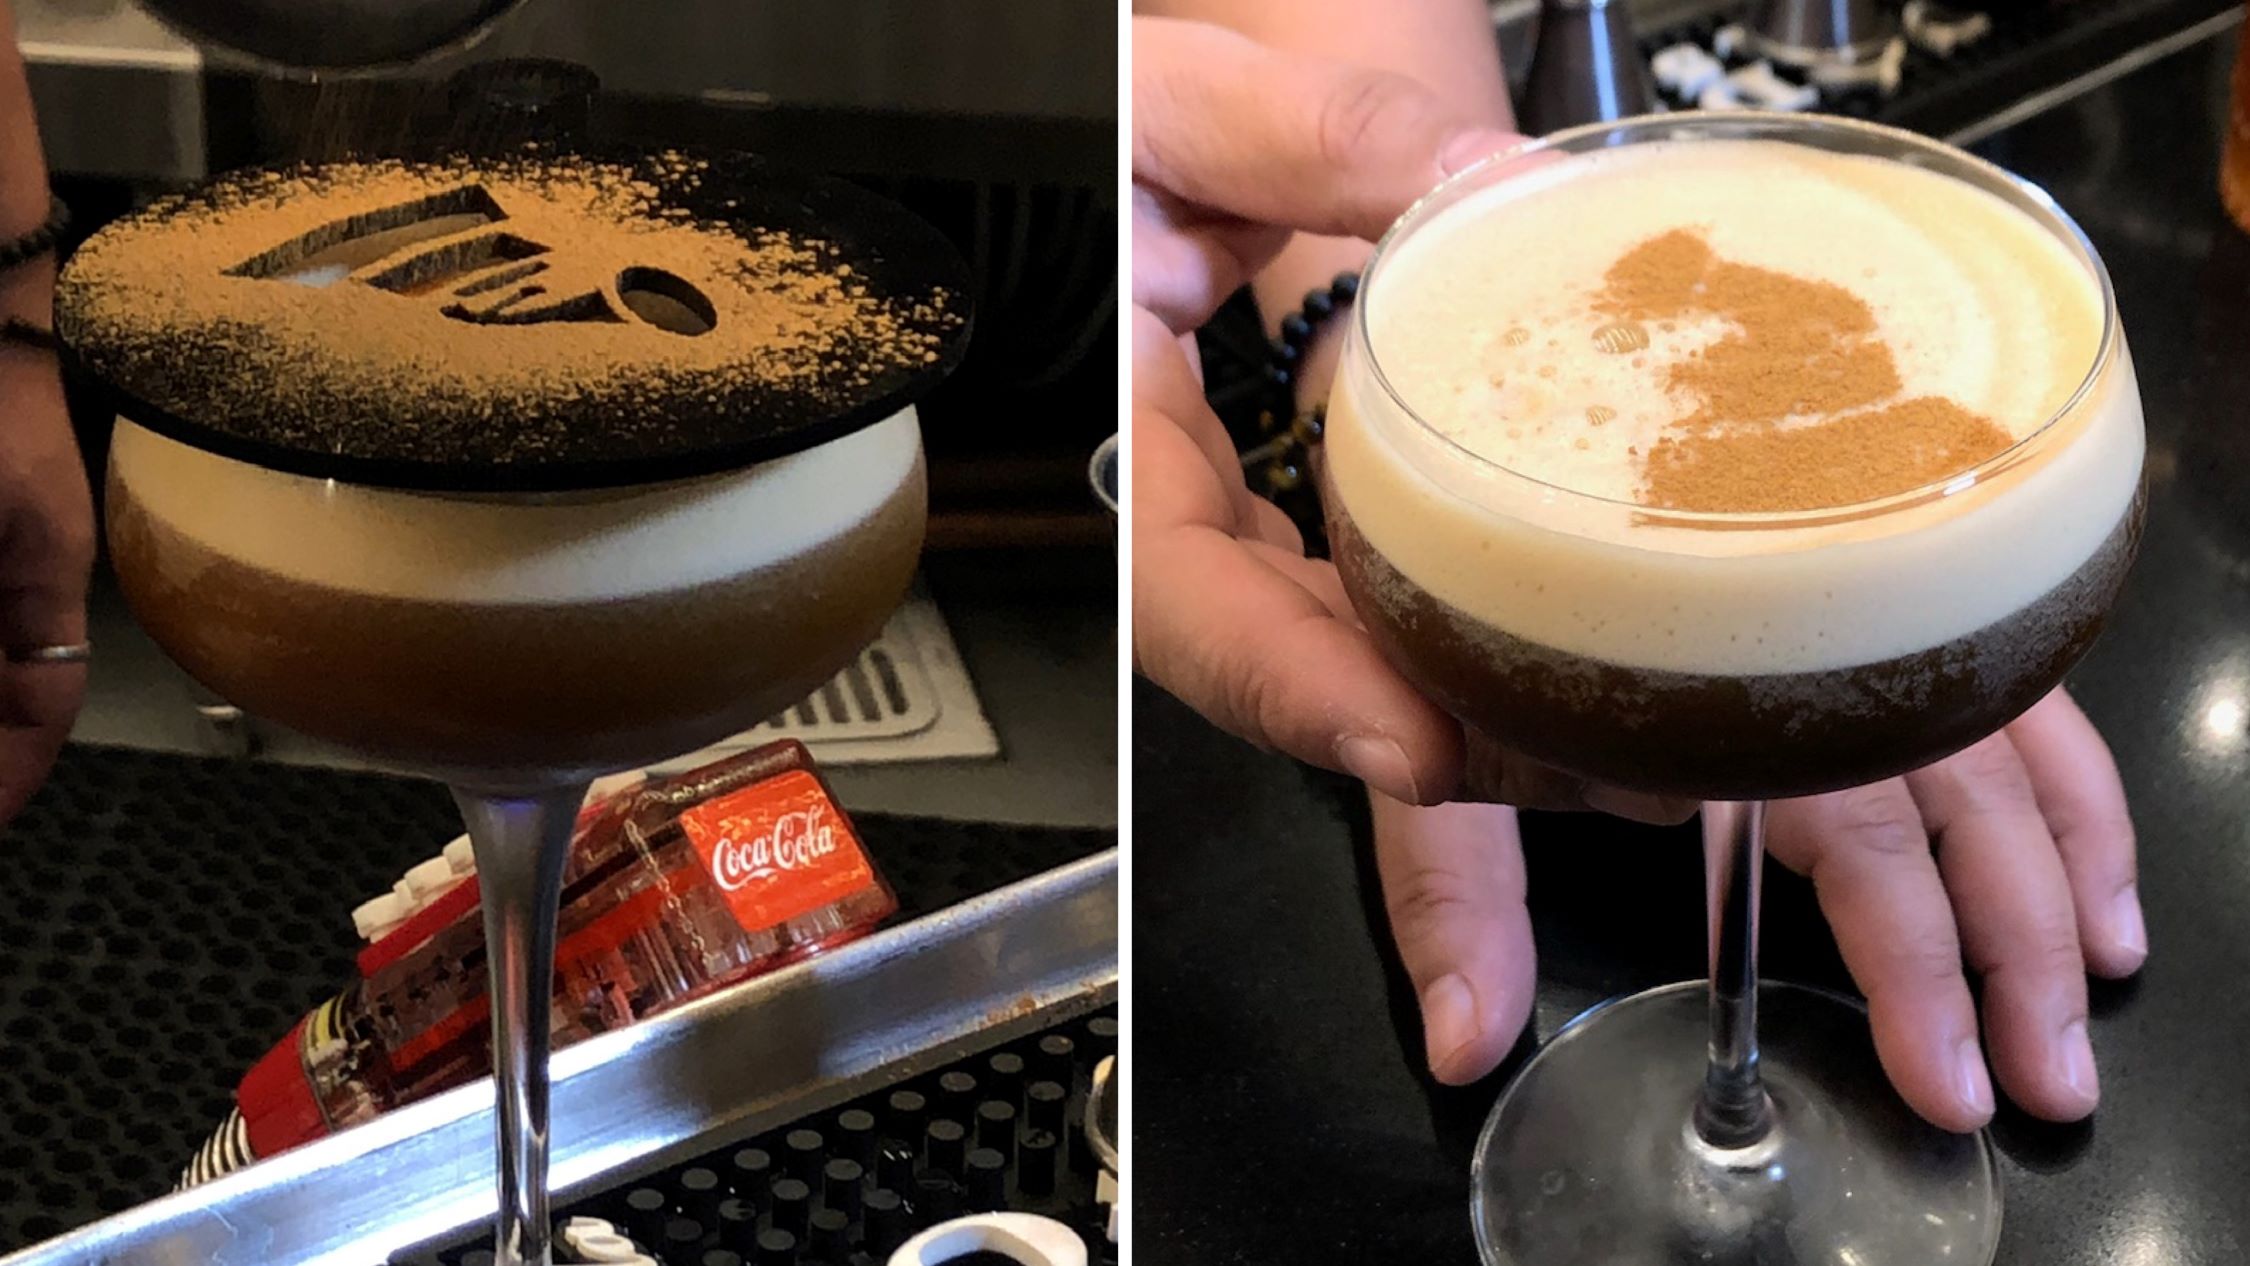 An image of the Skrewball Rock N' Roast Martini, a drink from the Grammys 2024 event.